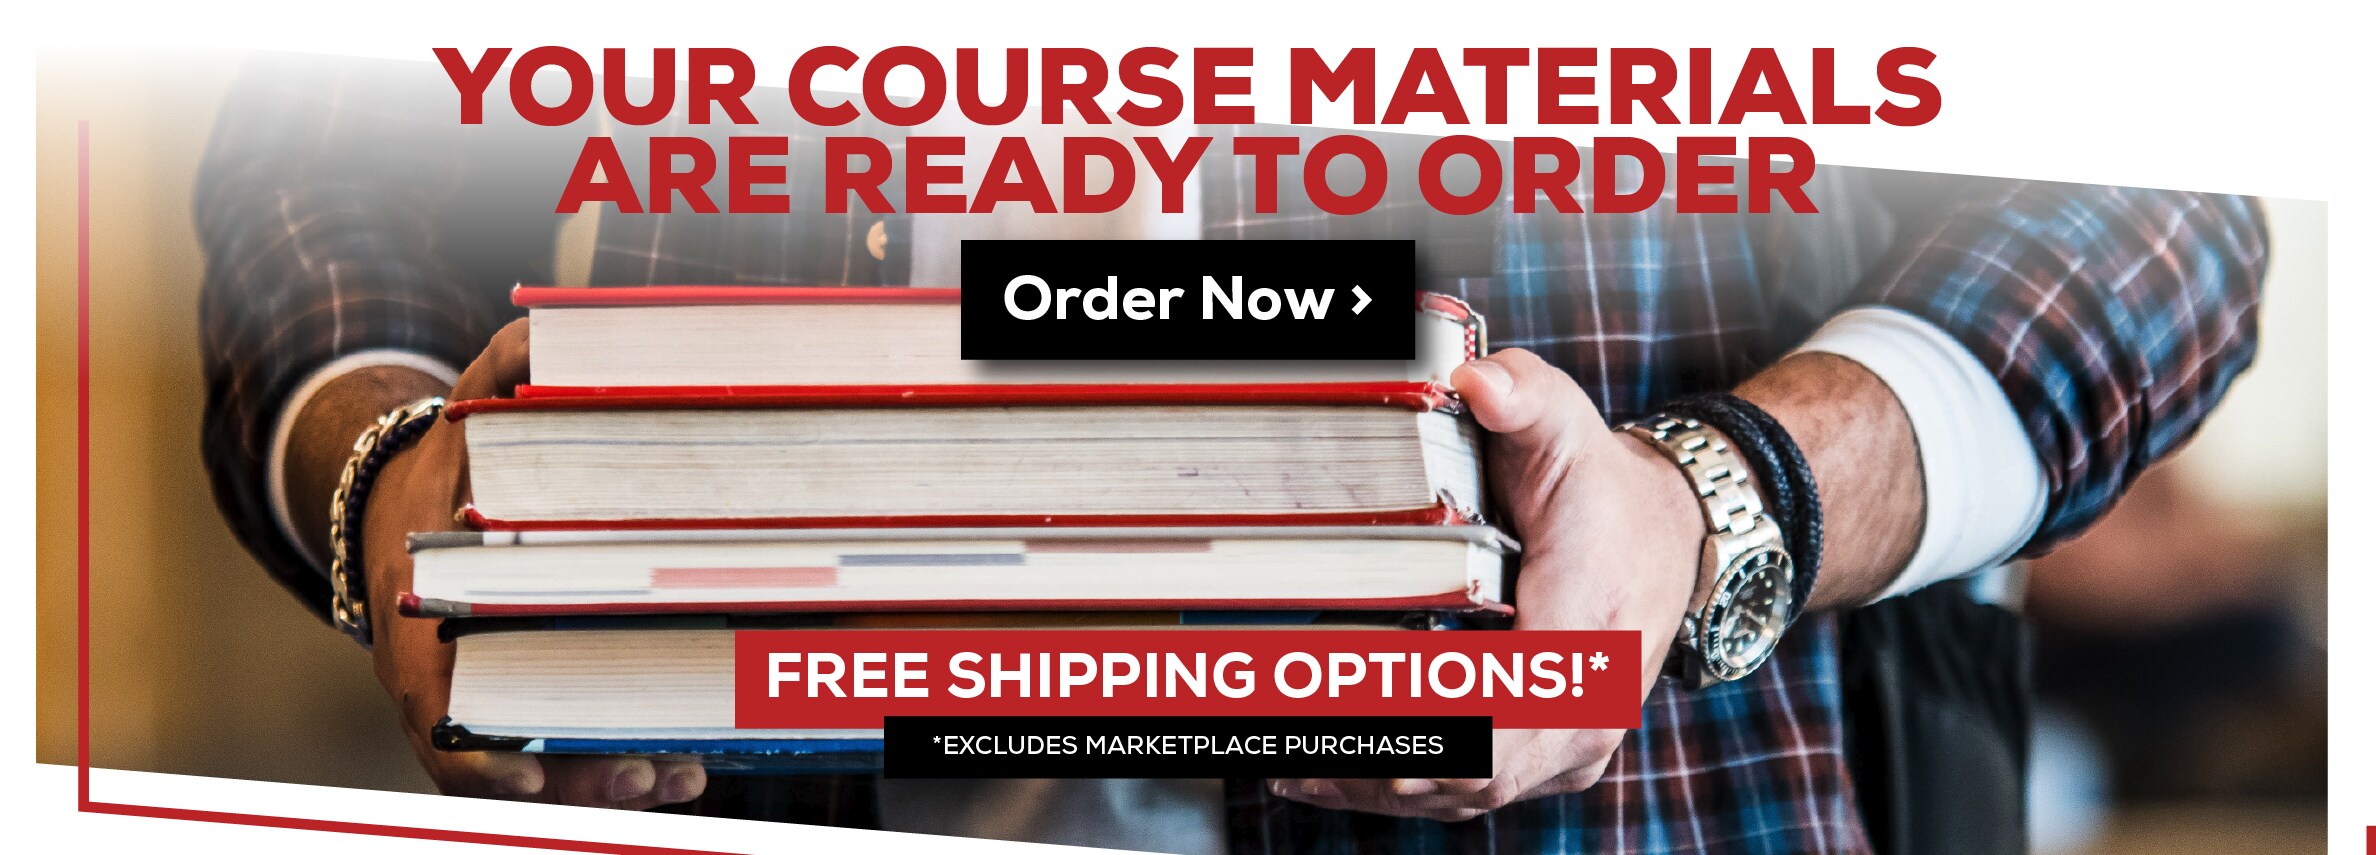 Your Course Materials Are Ready to Order. Order Now. Free shipping Options.* *Excludes marketplace purchases